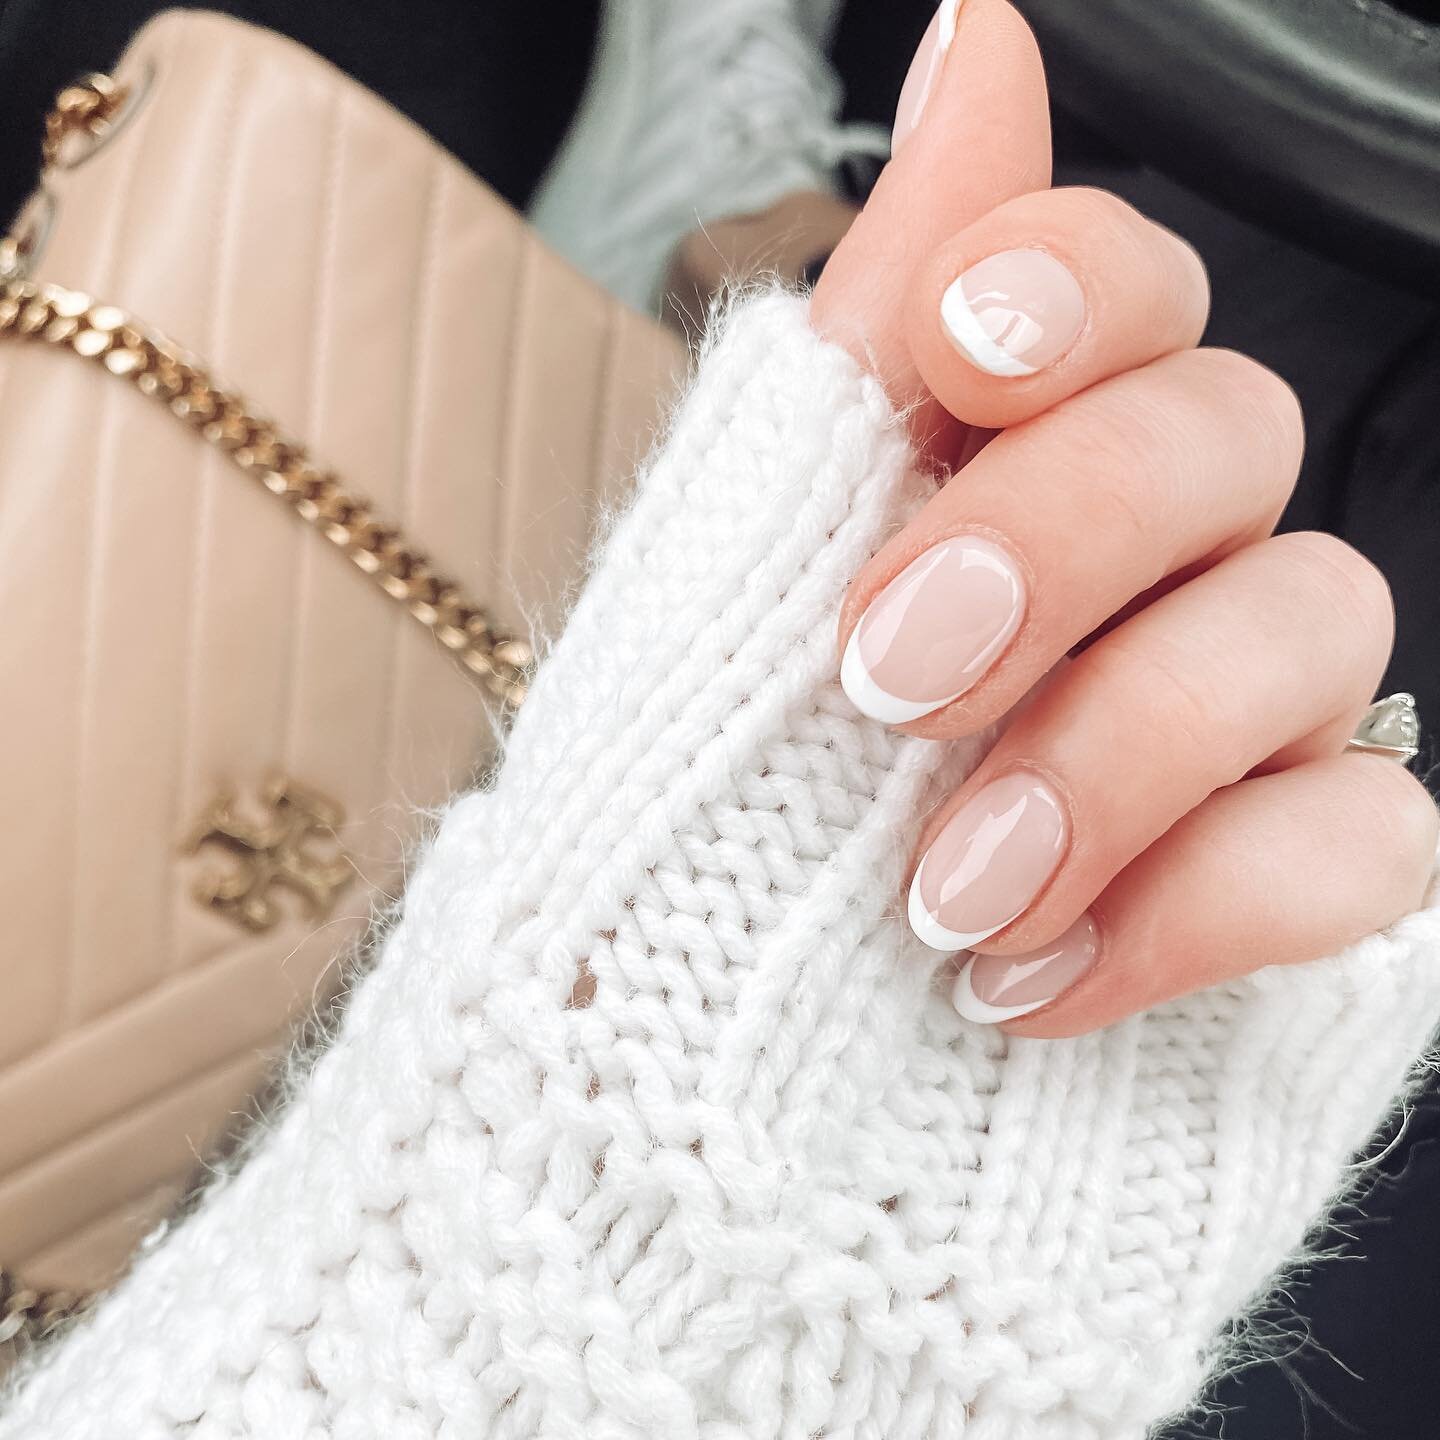 My go-to classic nails 💅🏼 

I get dip powder in shade &ldquo;barefoot 177&rdquo; - the perfect natural nude shade! The French tip is hand painted in white polish with a clear shellac over the top. I ask for a &ldquo;thin, classic&rdquo; tip and sof